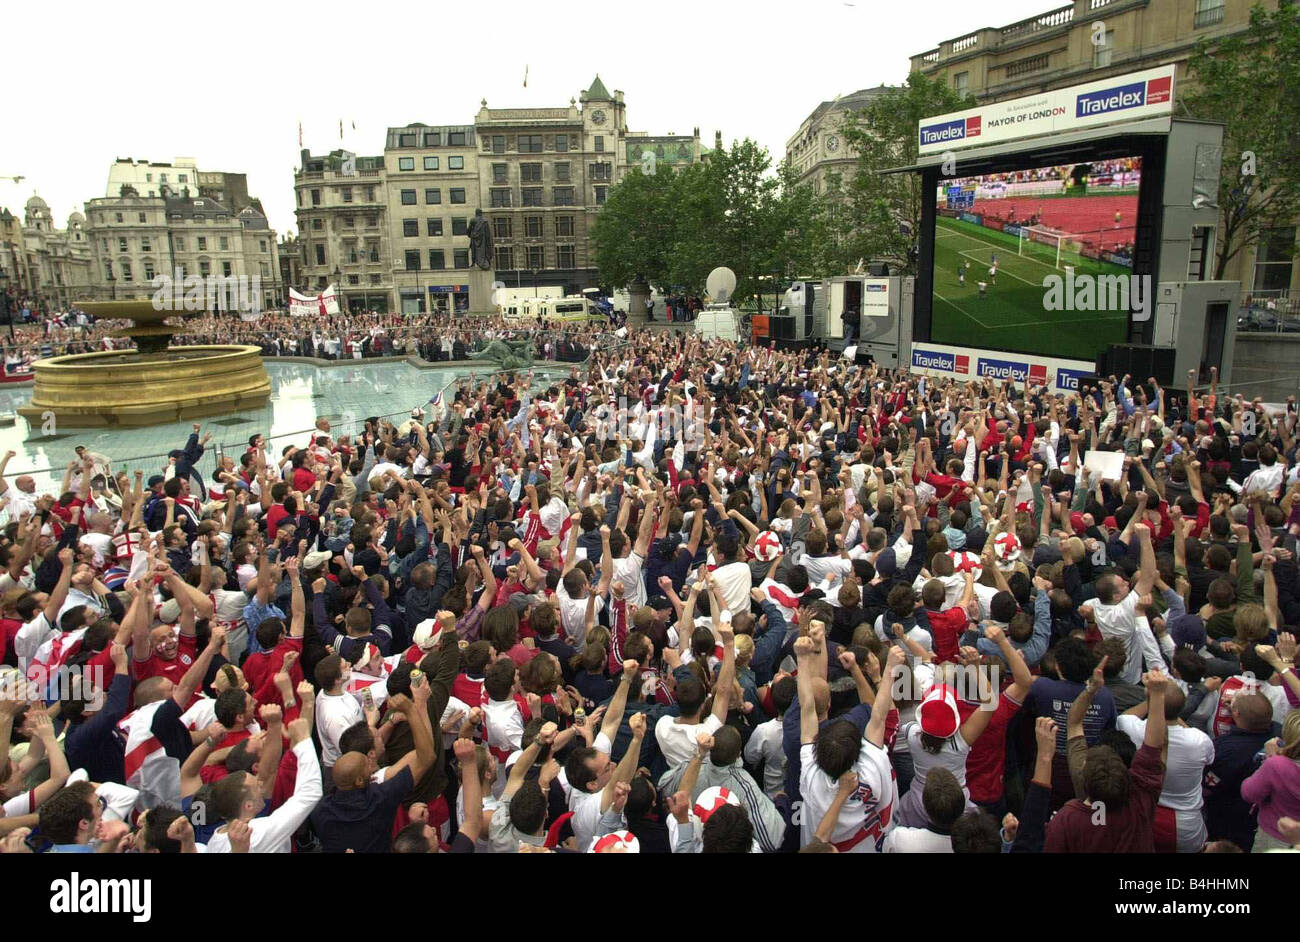 Football England v Brazil June 2002 World Cup Korea/Japan England football fans watch their team lose 2-1 to Brazil in the World Cup quarter finals on a large TV screen in Trafalgar Square, London THE SCENES IN TRAFALGAR SQUARE AS CROWDS WATCH ENGLAND BEATEN IN THE WORLD CUP ON A LARGE T.V. SCREEN THEN AFTER THE MATCH AND IN THE SQUARE'S FOUNTAINS GOAL Stock Photo